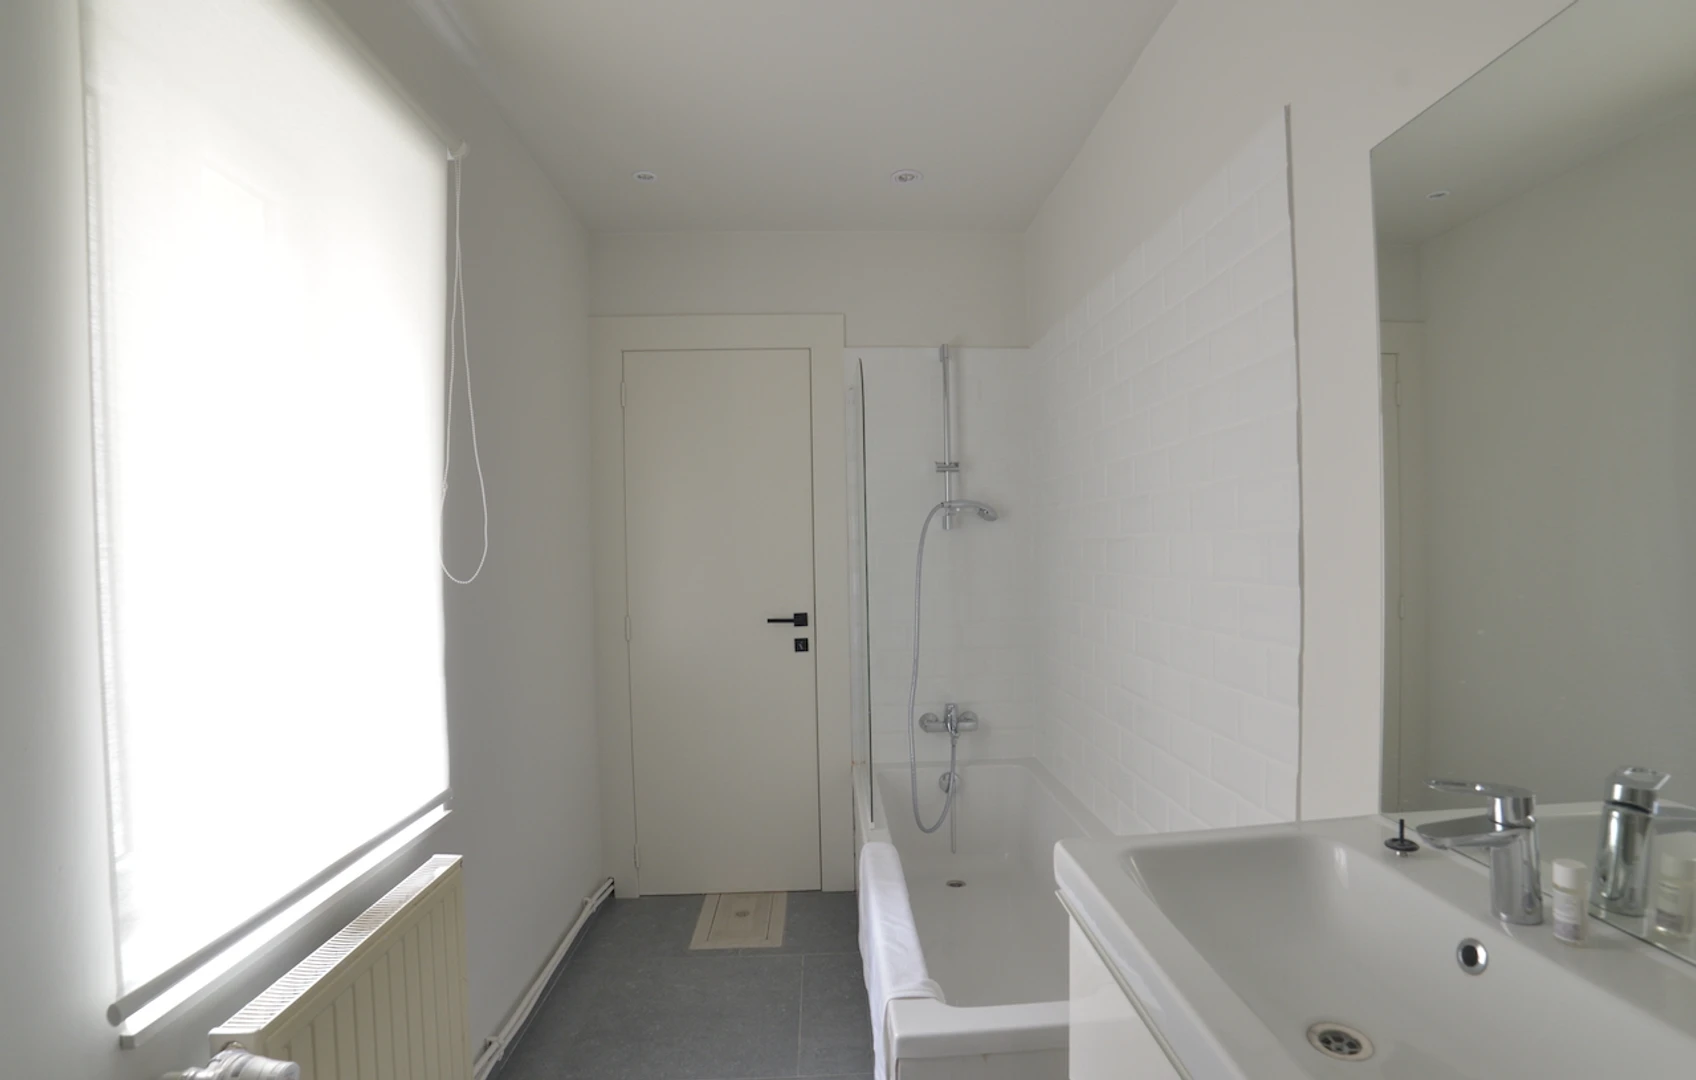 Room for rent with double bed Bruxelles/brussels